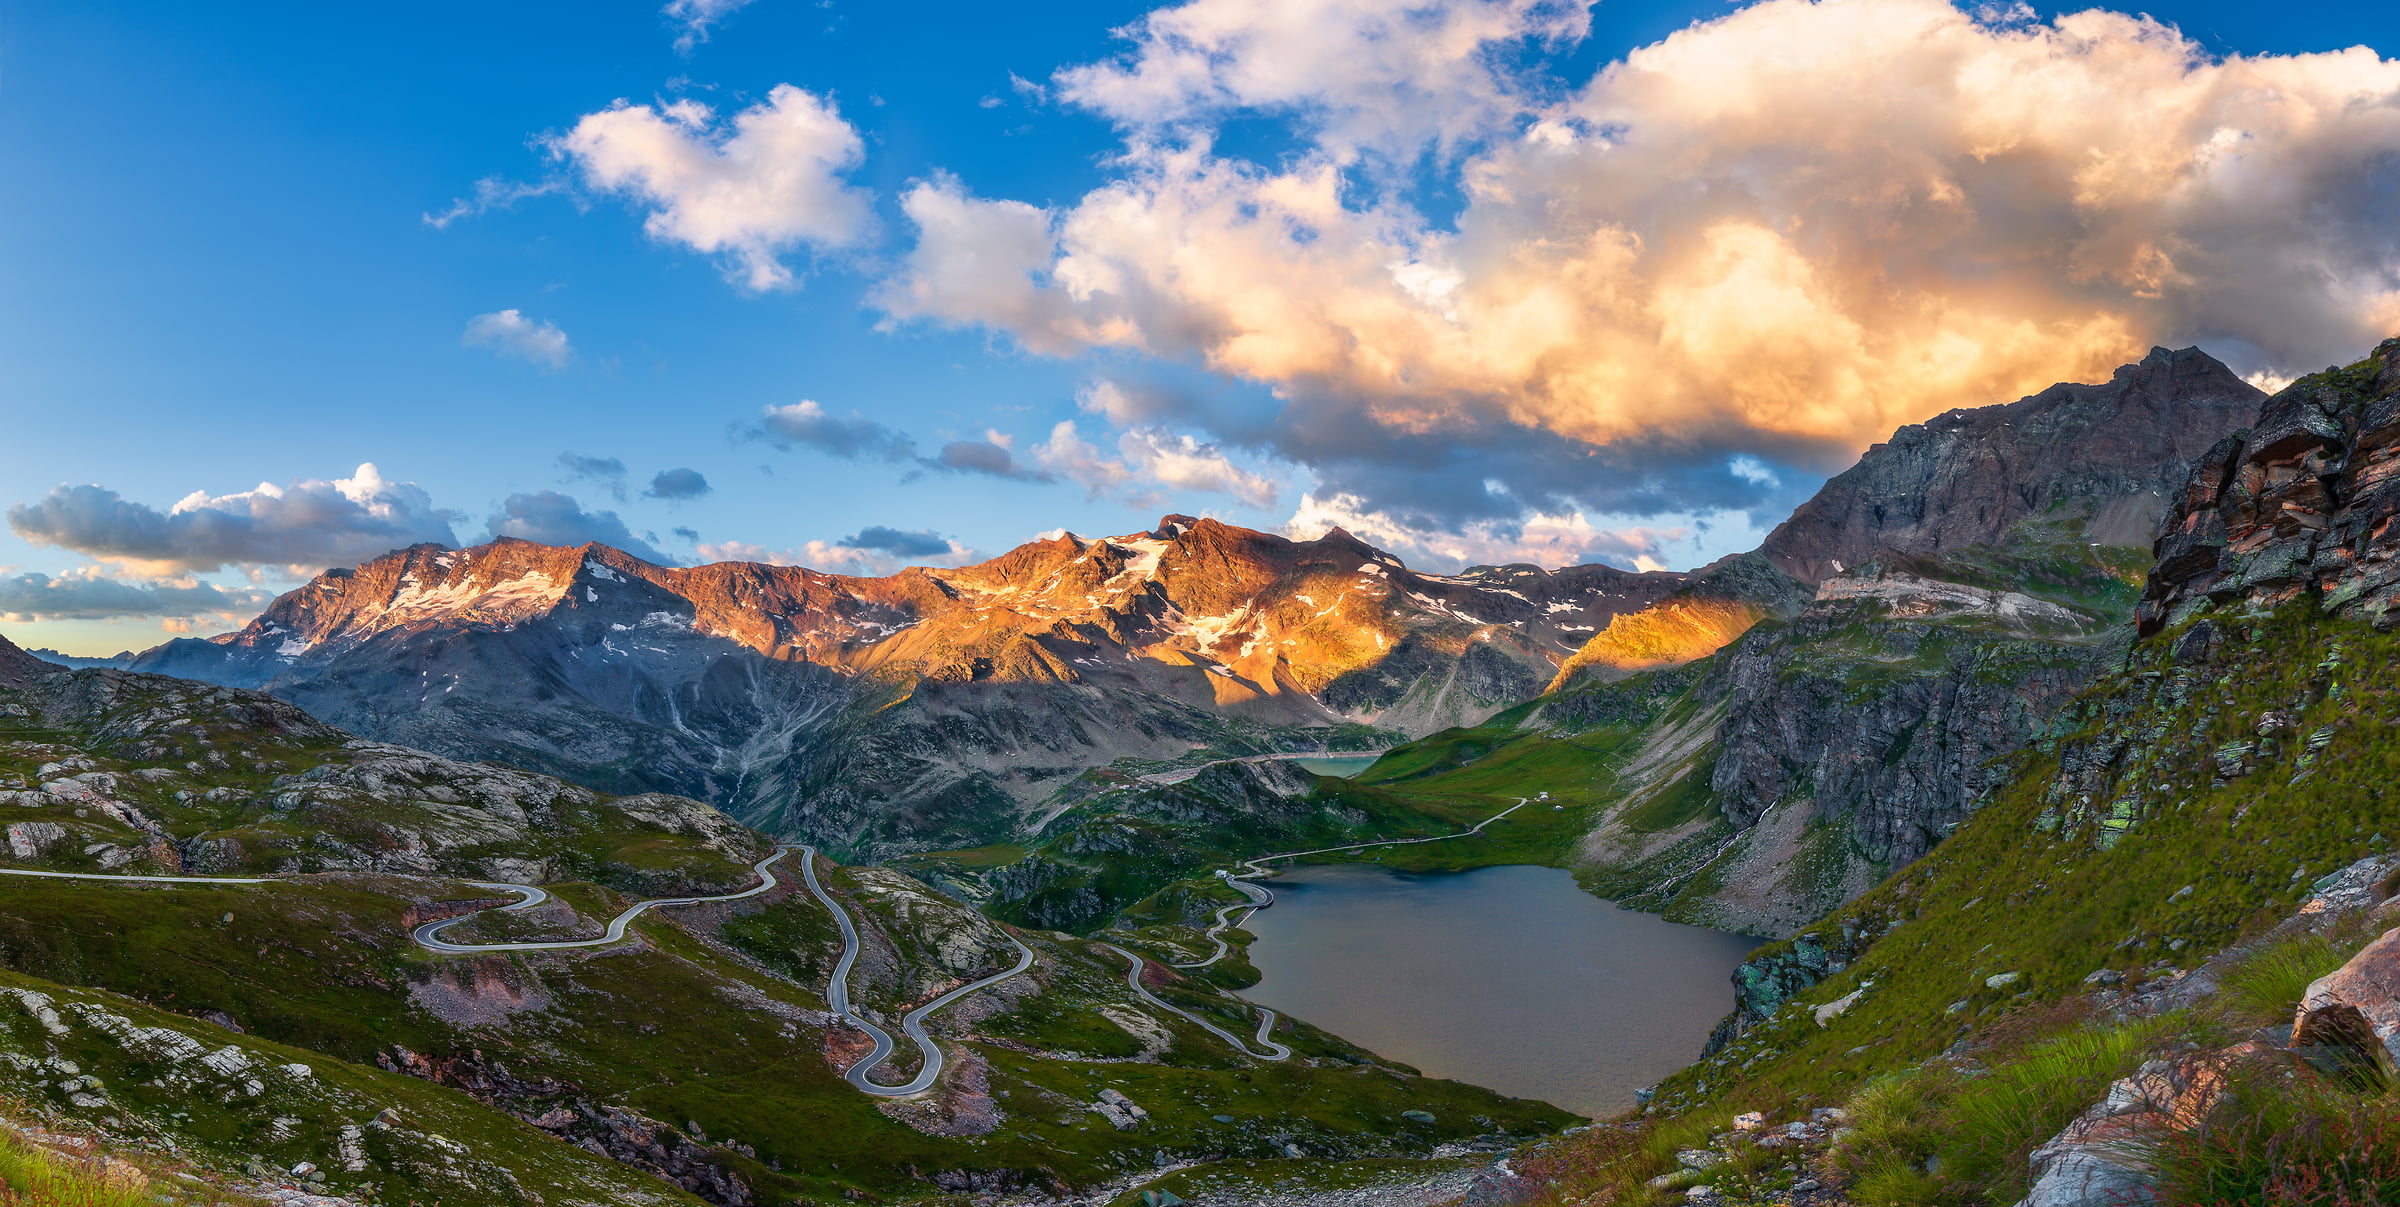 140 megapixels! A very high resolution, large-format VAST photo print of a heavenly landscape with mountains, a lake, a road, and clouds at sunset; photograph created by Duilio Fiorille in Gran Paradiso National Park, Ceresole Reale, Piedmont, Italy